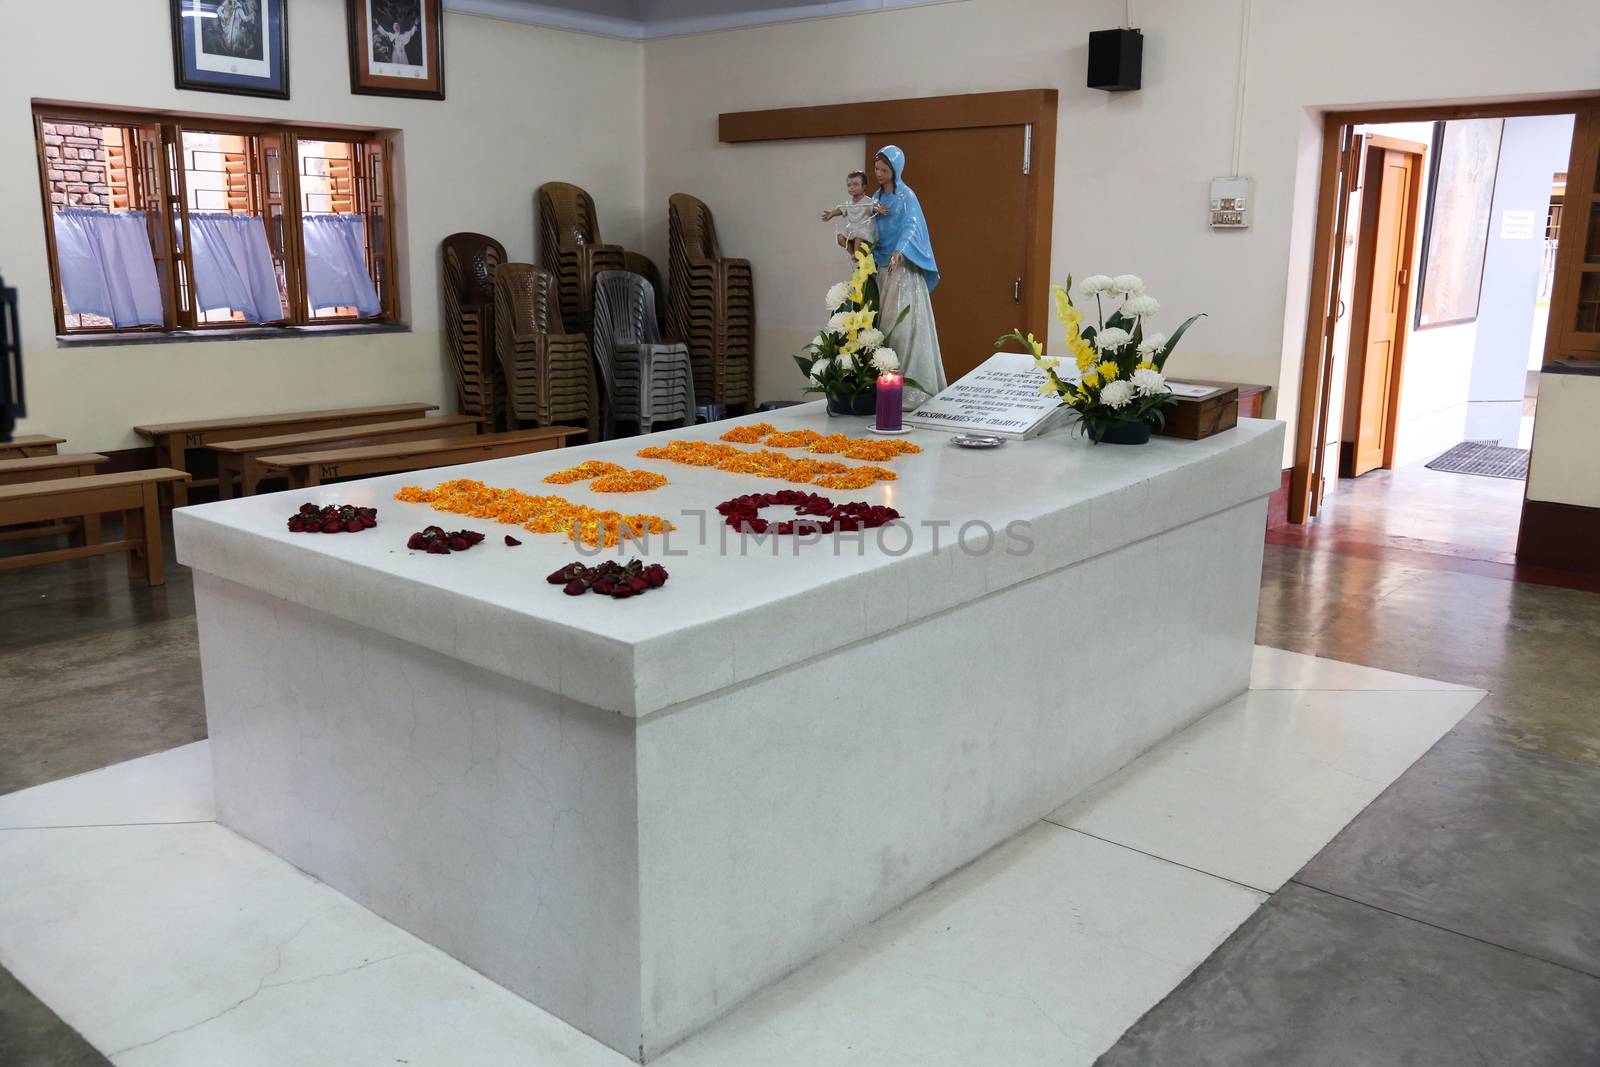 Tomb of Mother Teresa, decorated with fresh flowers in Kolkata, West Bengal, India on Nov 25,2012.